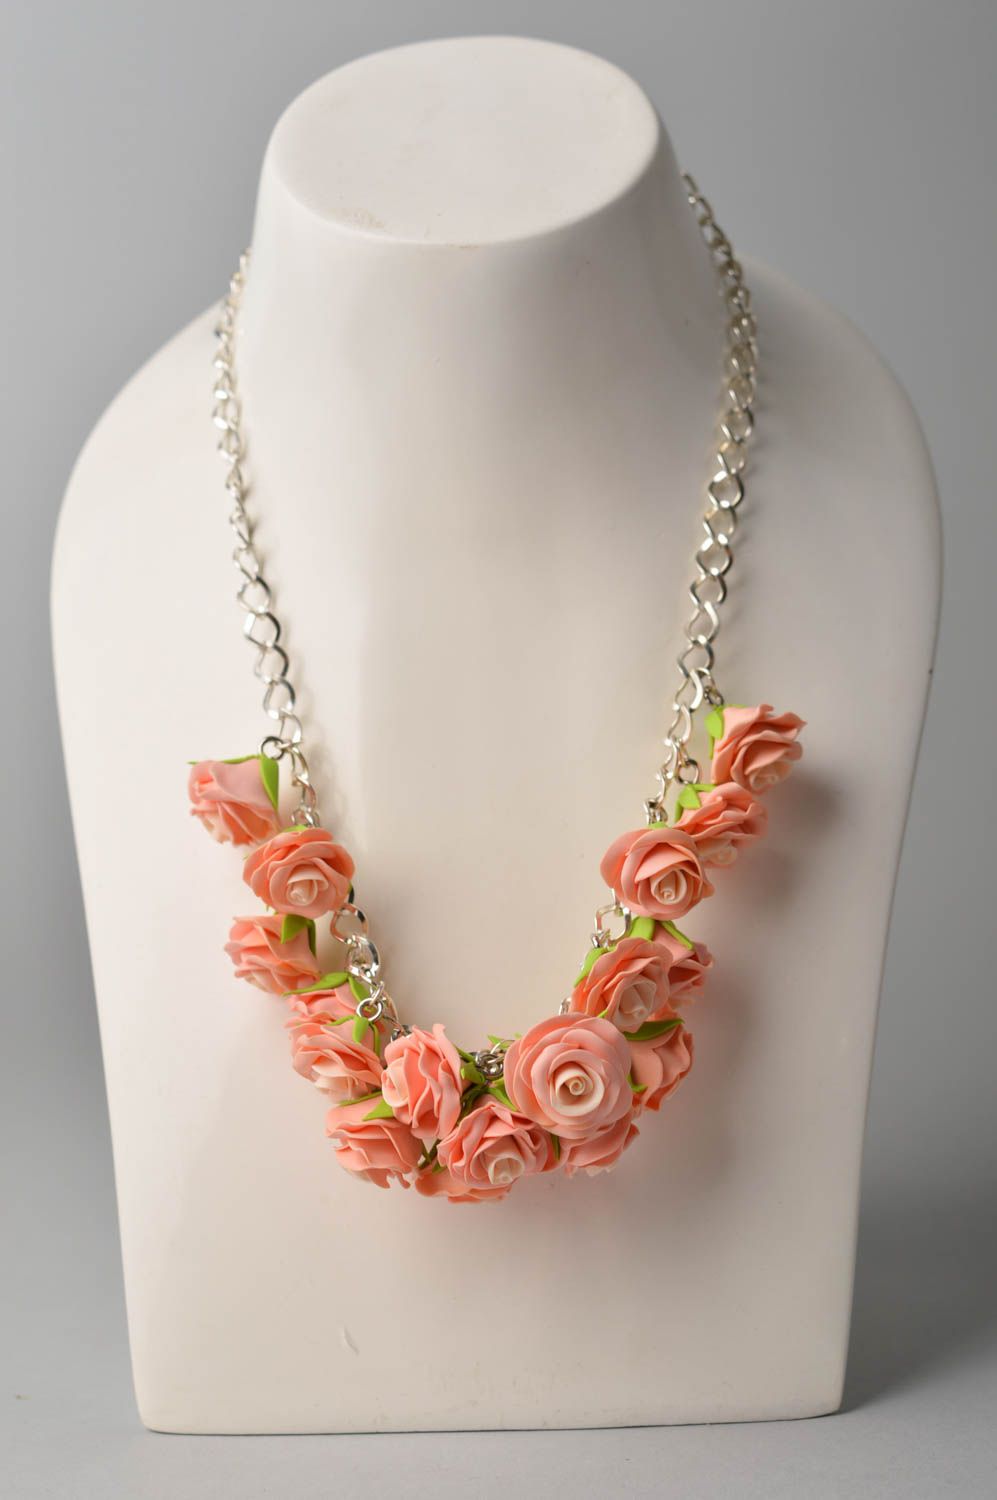 Flower jewelry handmade necklace chain necklace polymer clay designer accessory photo 1